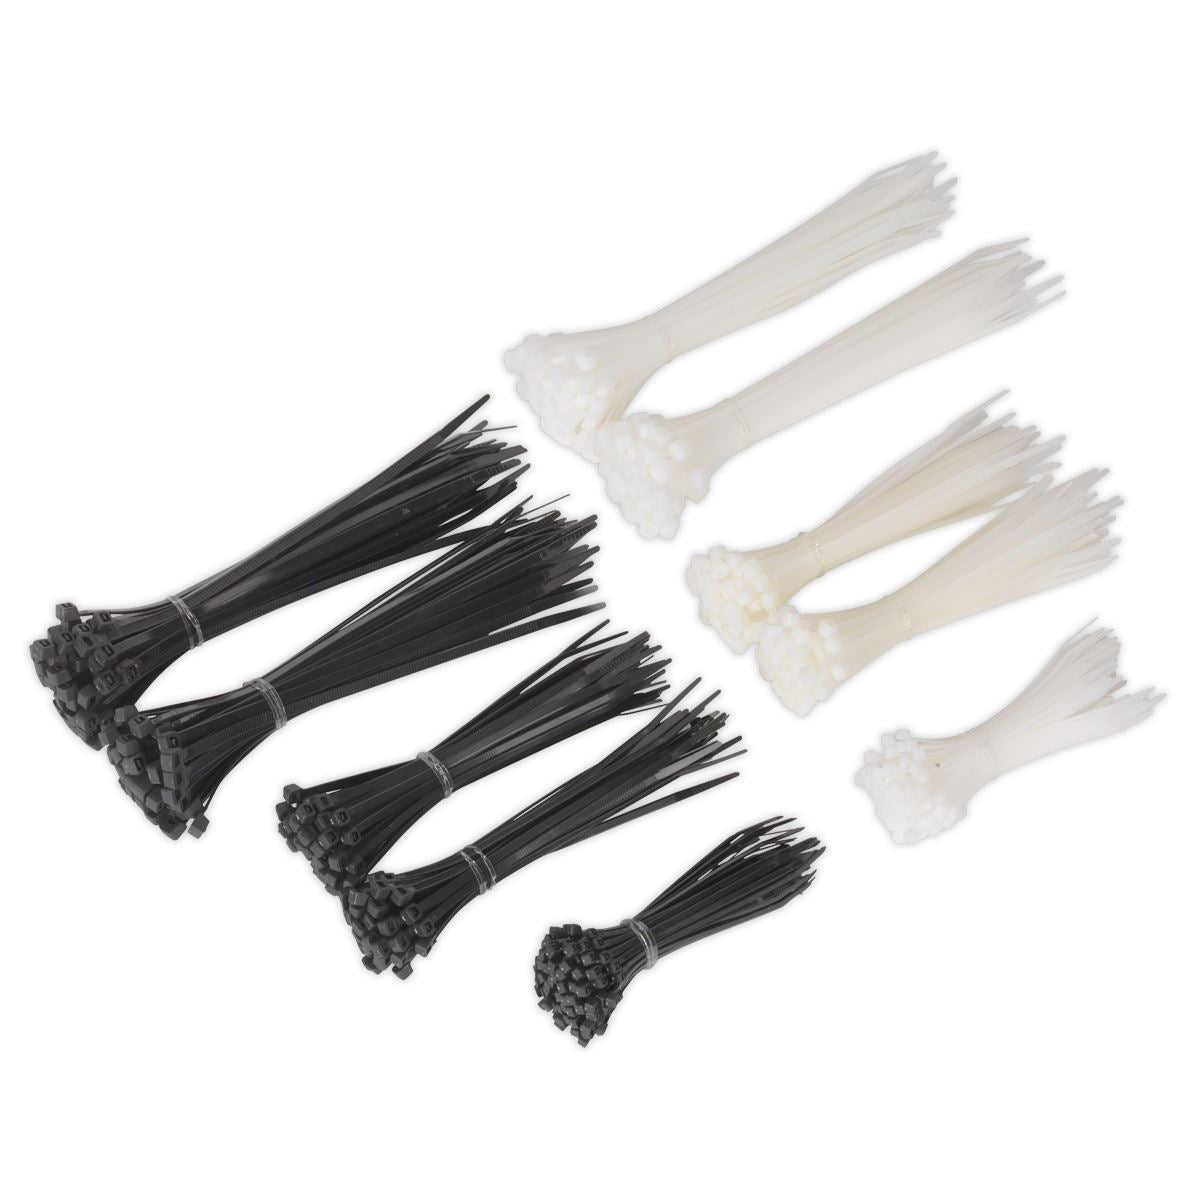 Sealey Cable Tie Assortment Black/White Pack of 600 CT600BW